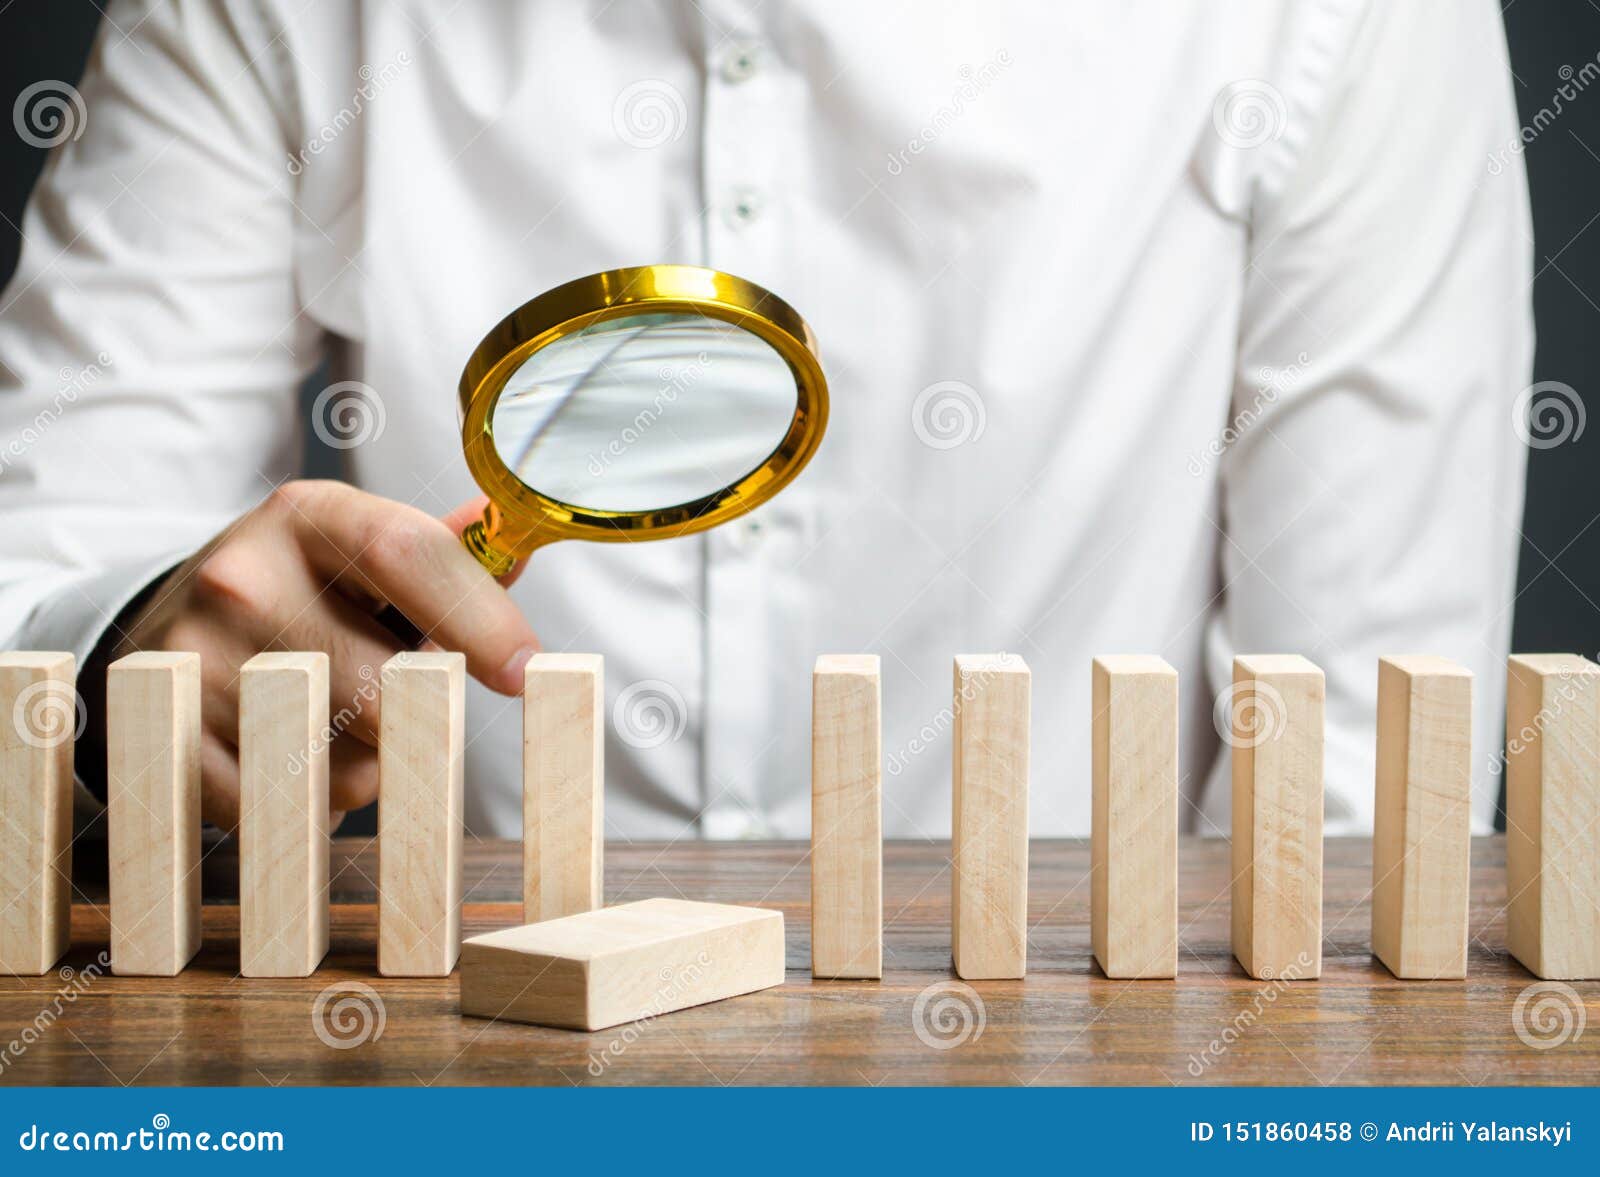 the wooden block fell out of order. the study of business mistakes. weak link. unreliable and unsuccessful plan. risk assessment